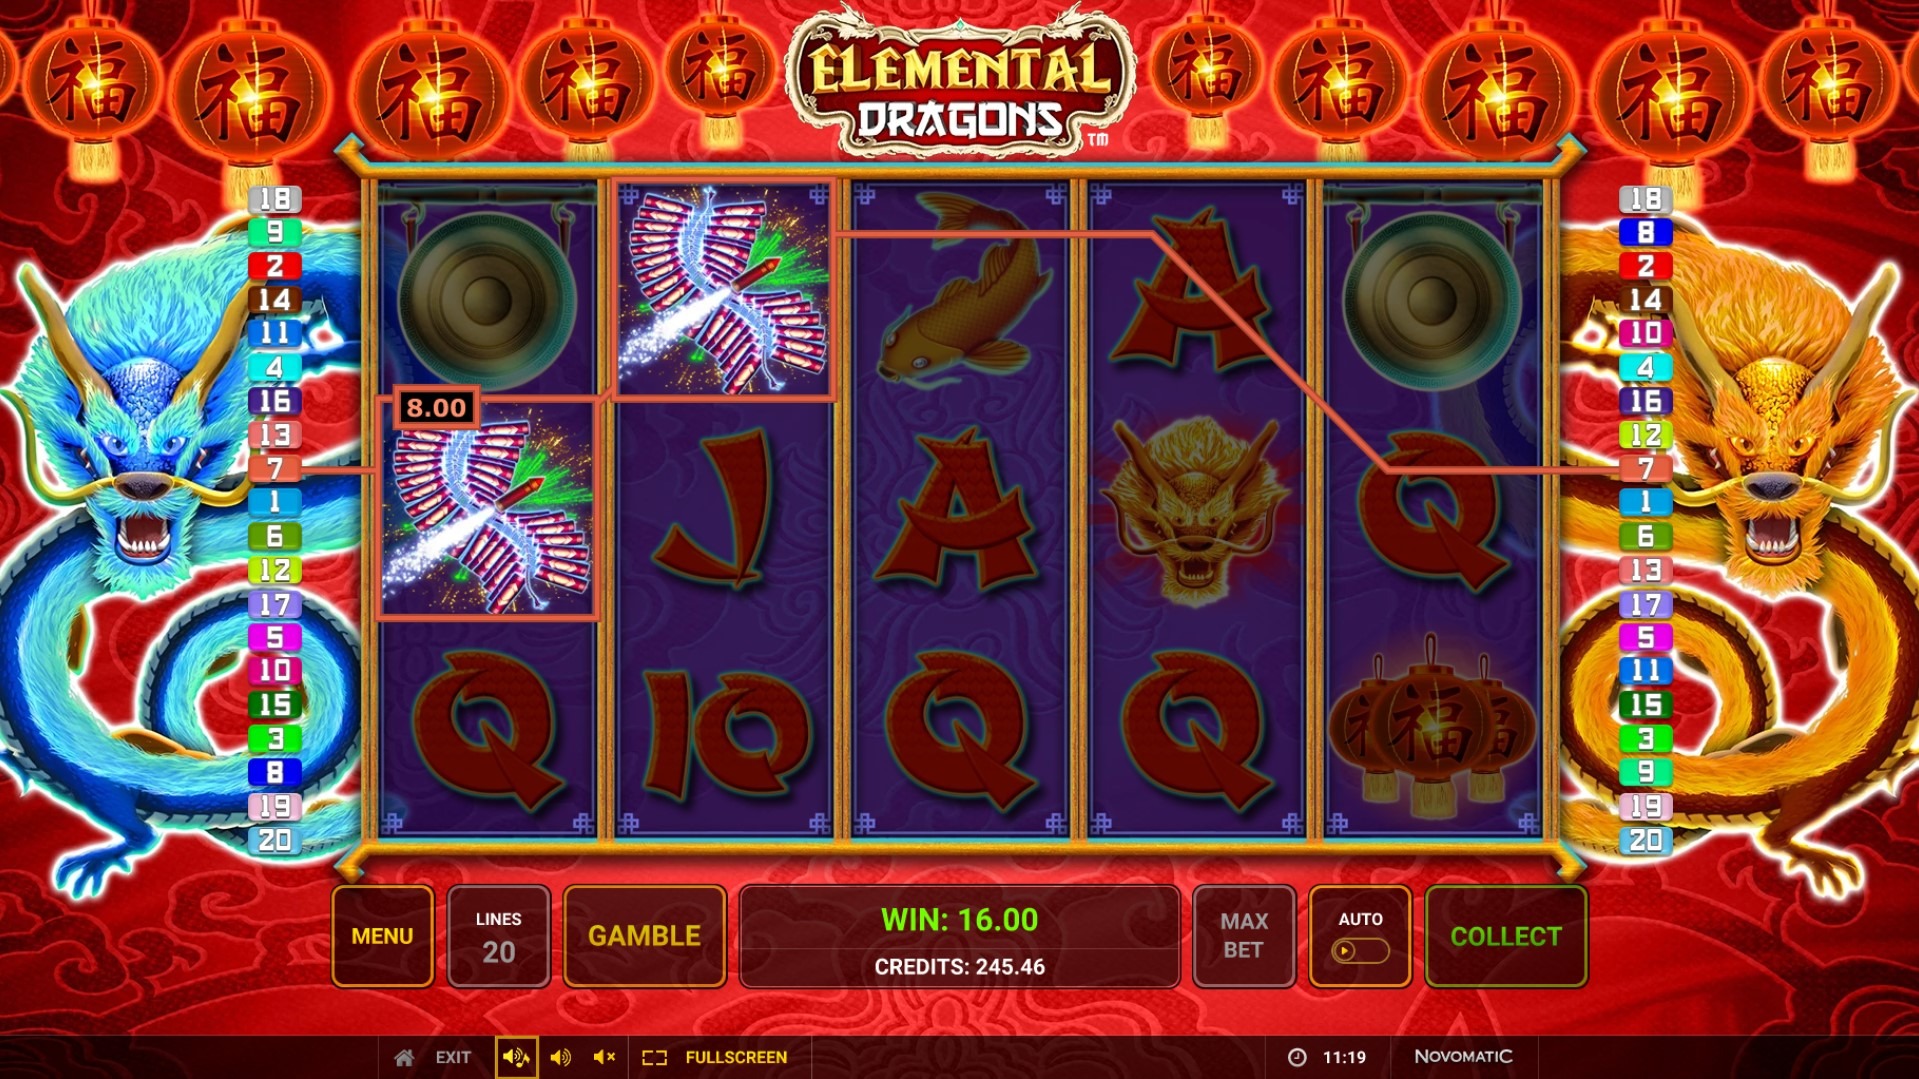 Jack and the beanstalk free spins